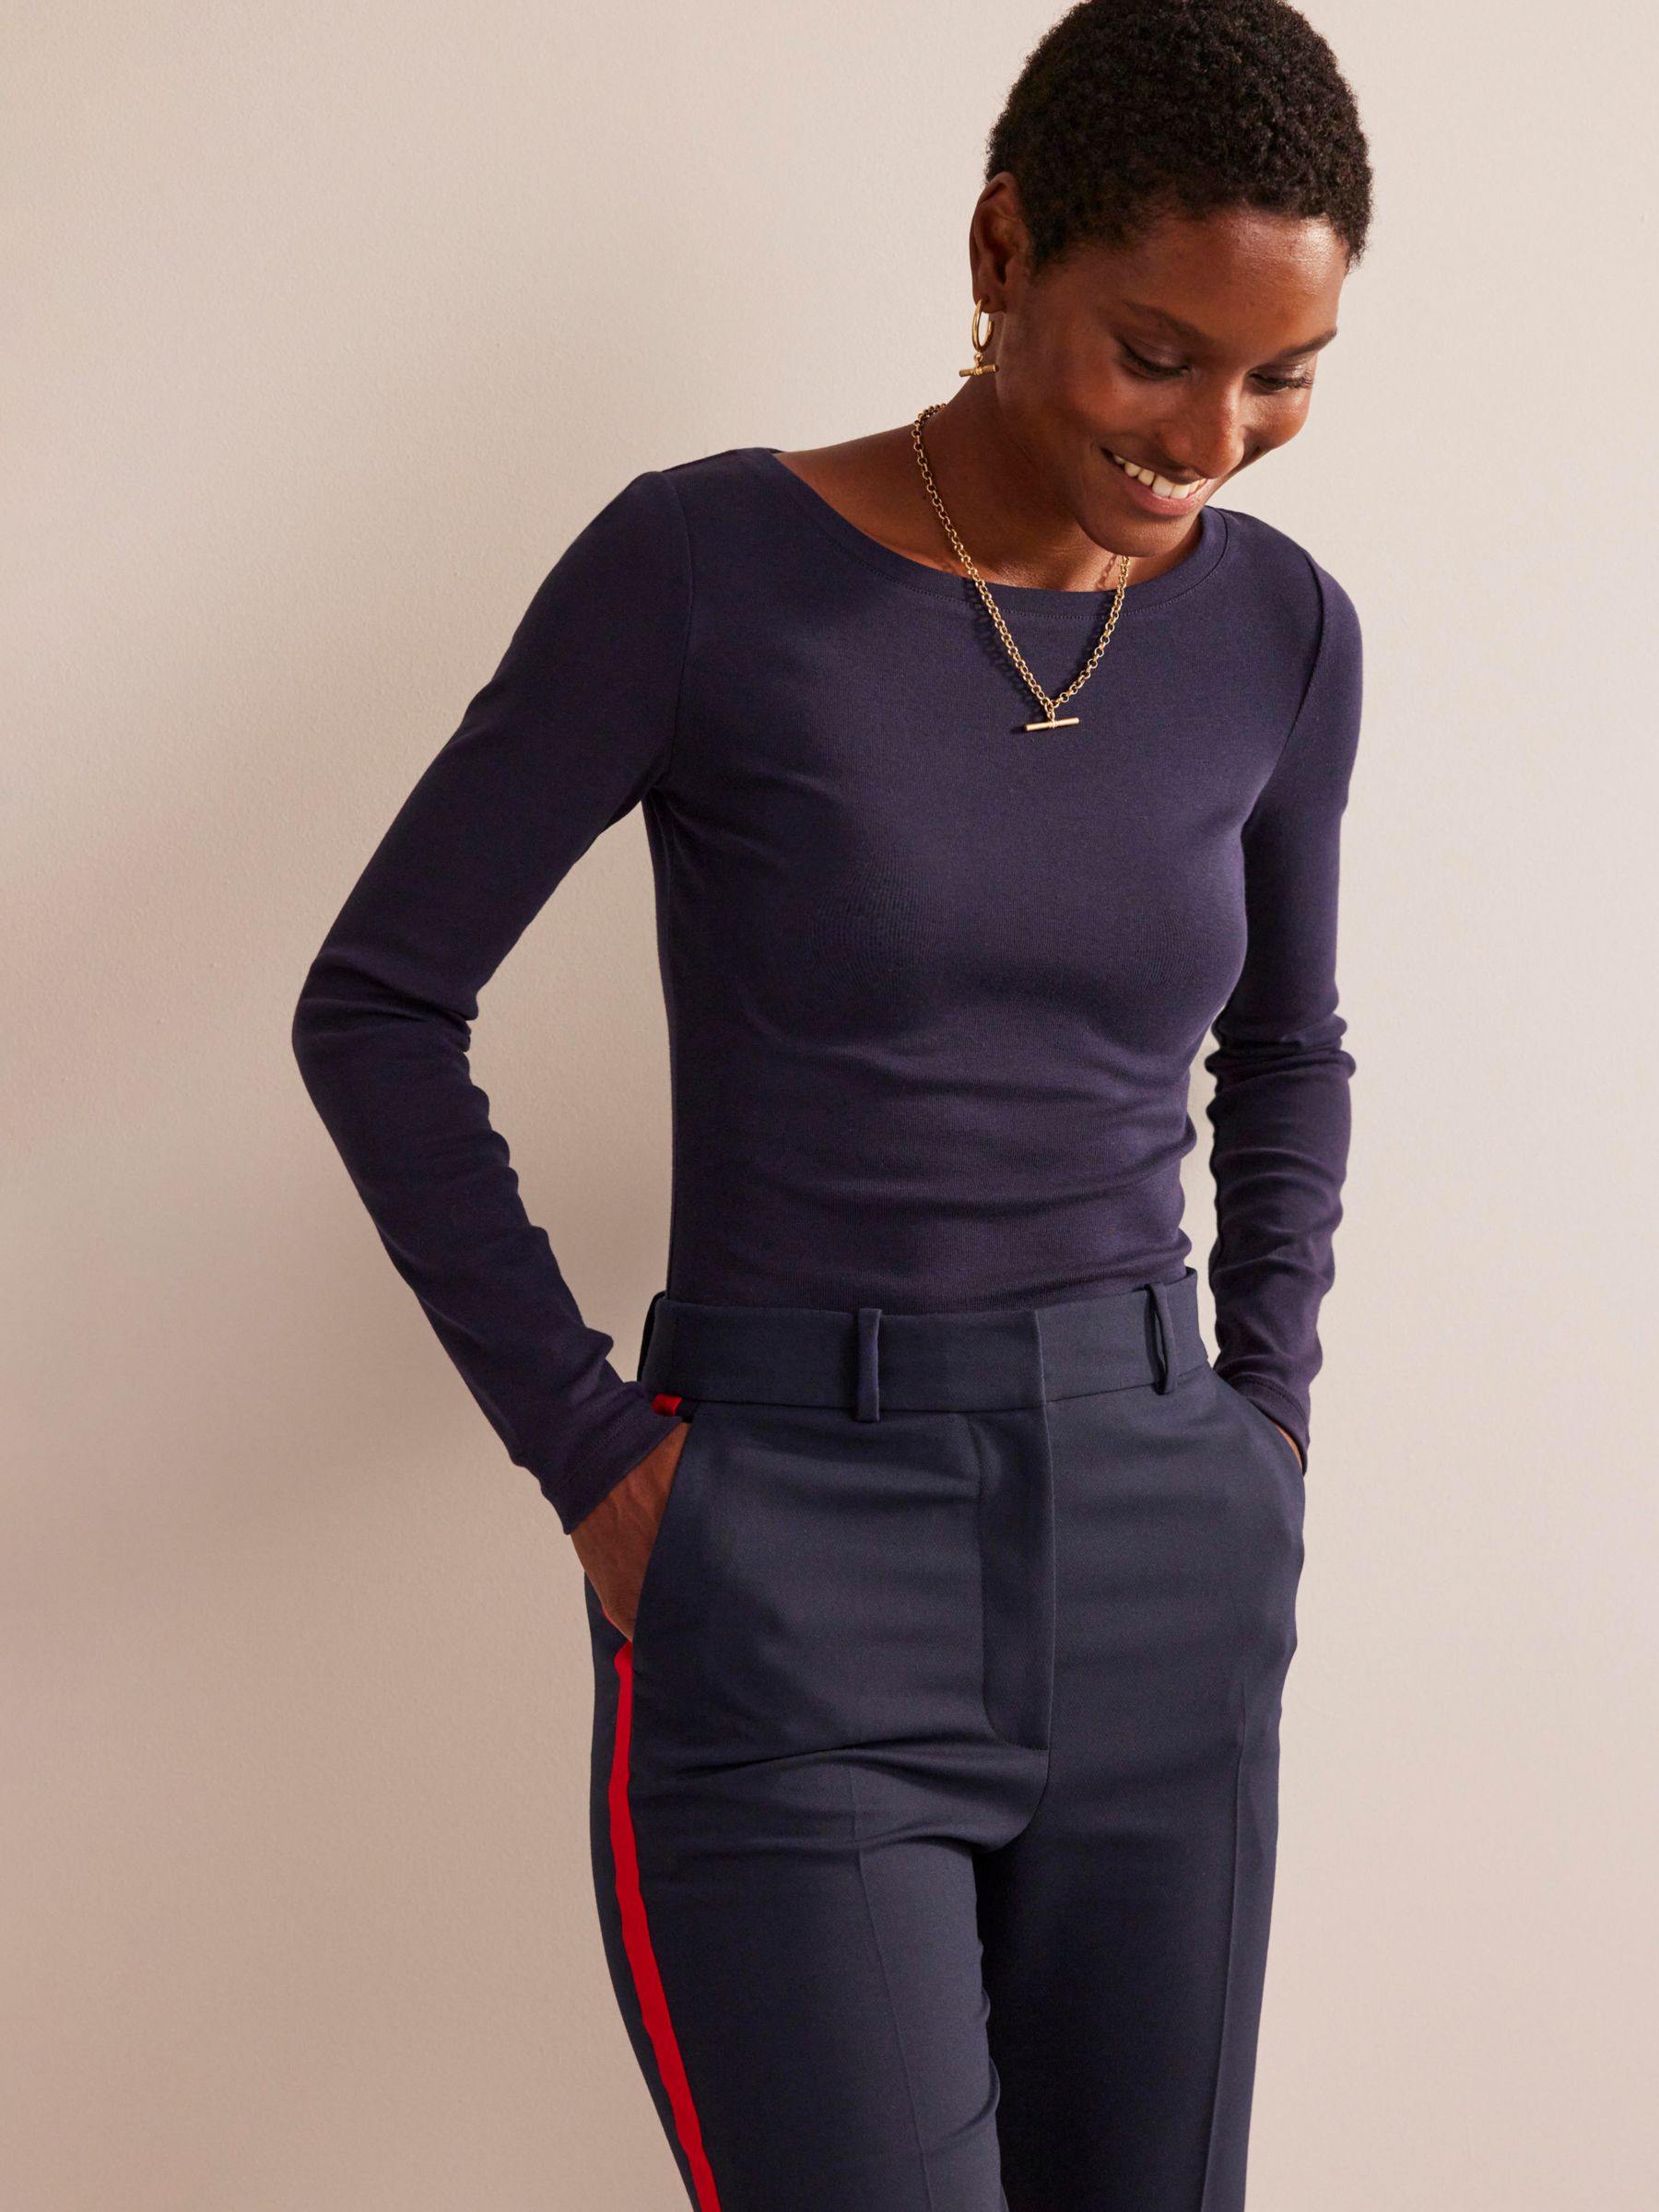 Boden Essential Boat-Neck Jersey Top, Navy at John Lewis & Partners